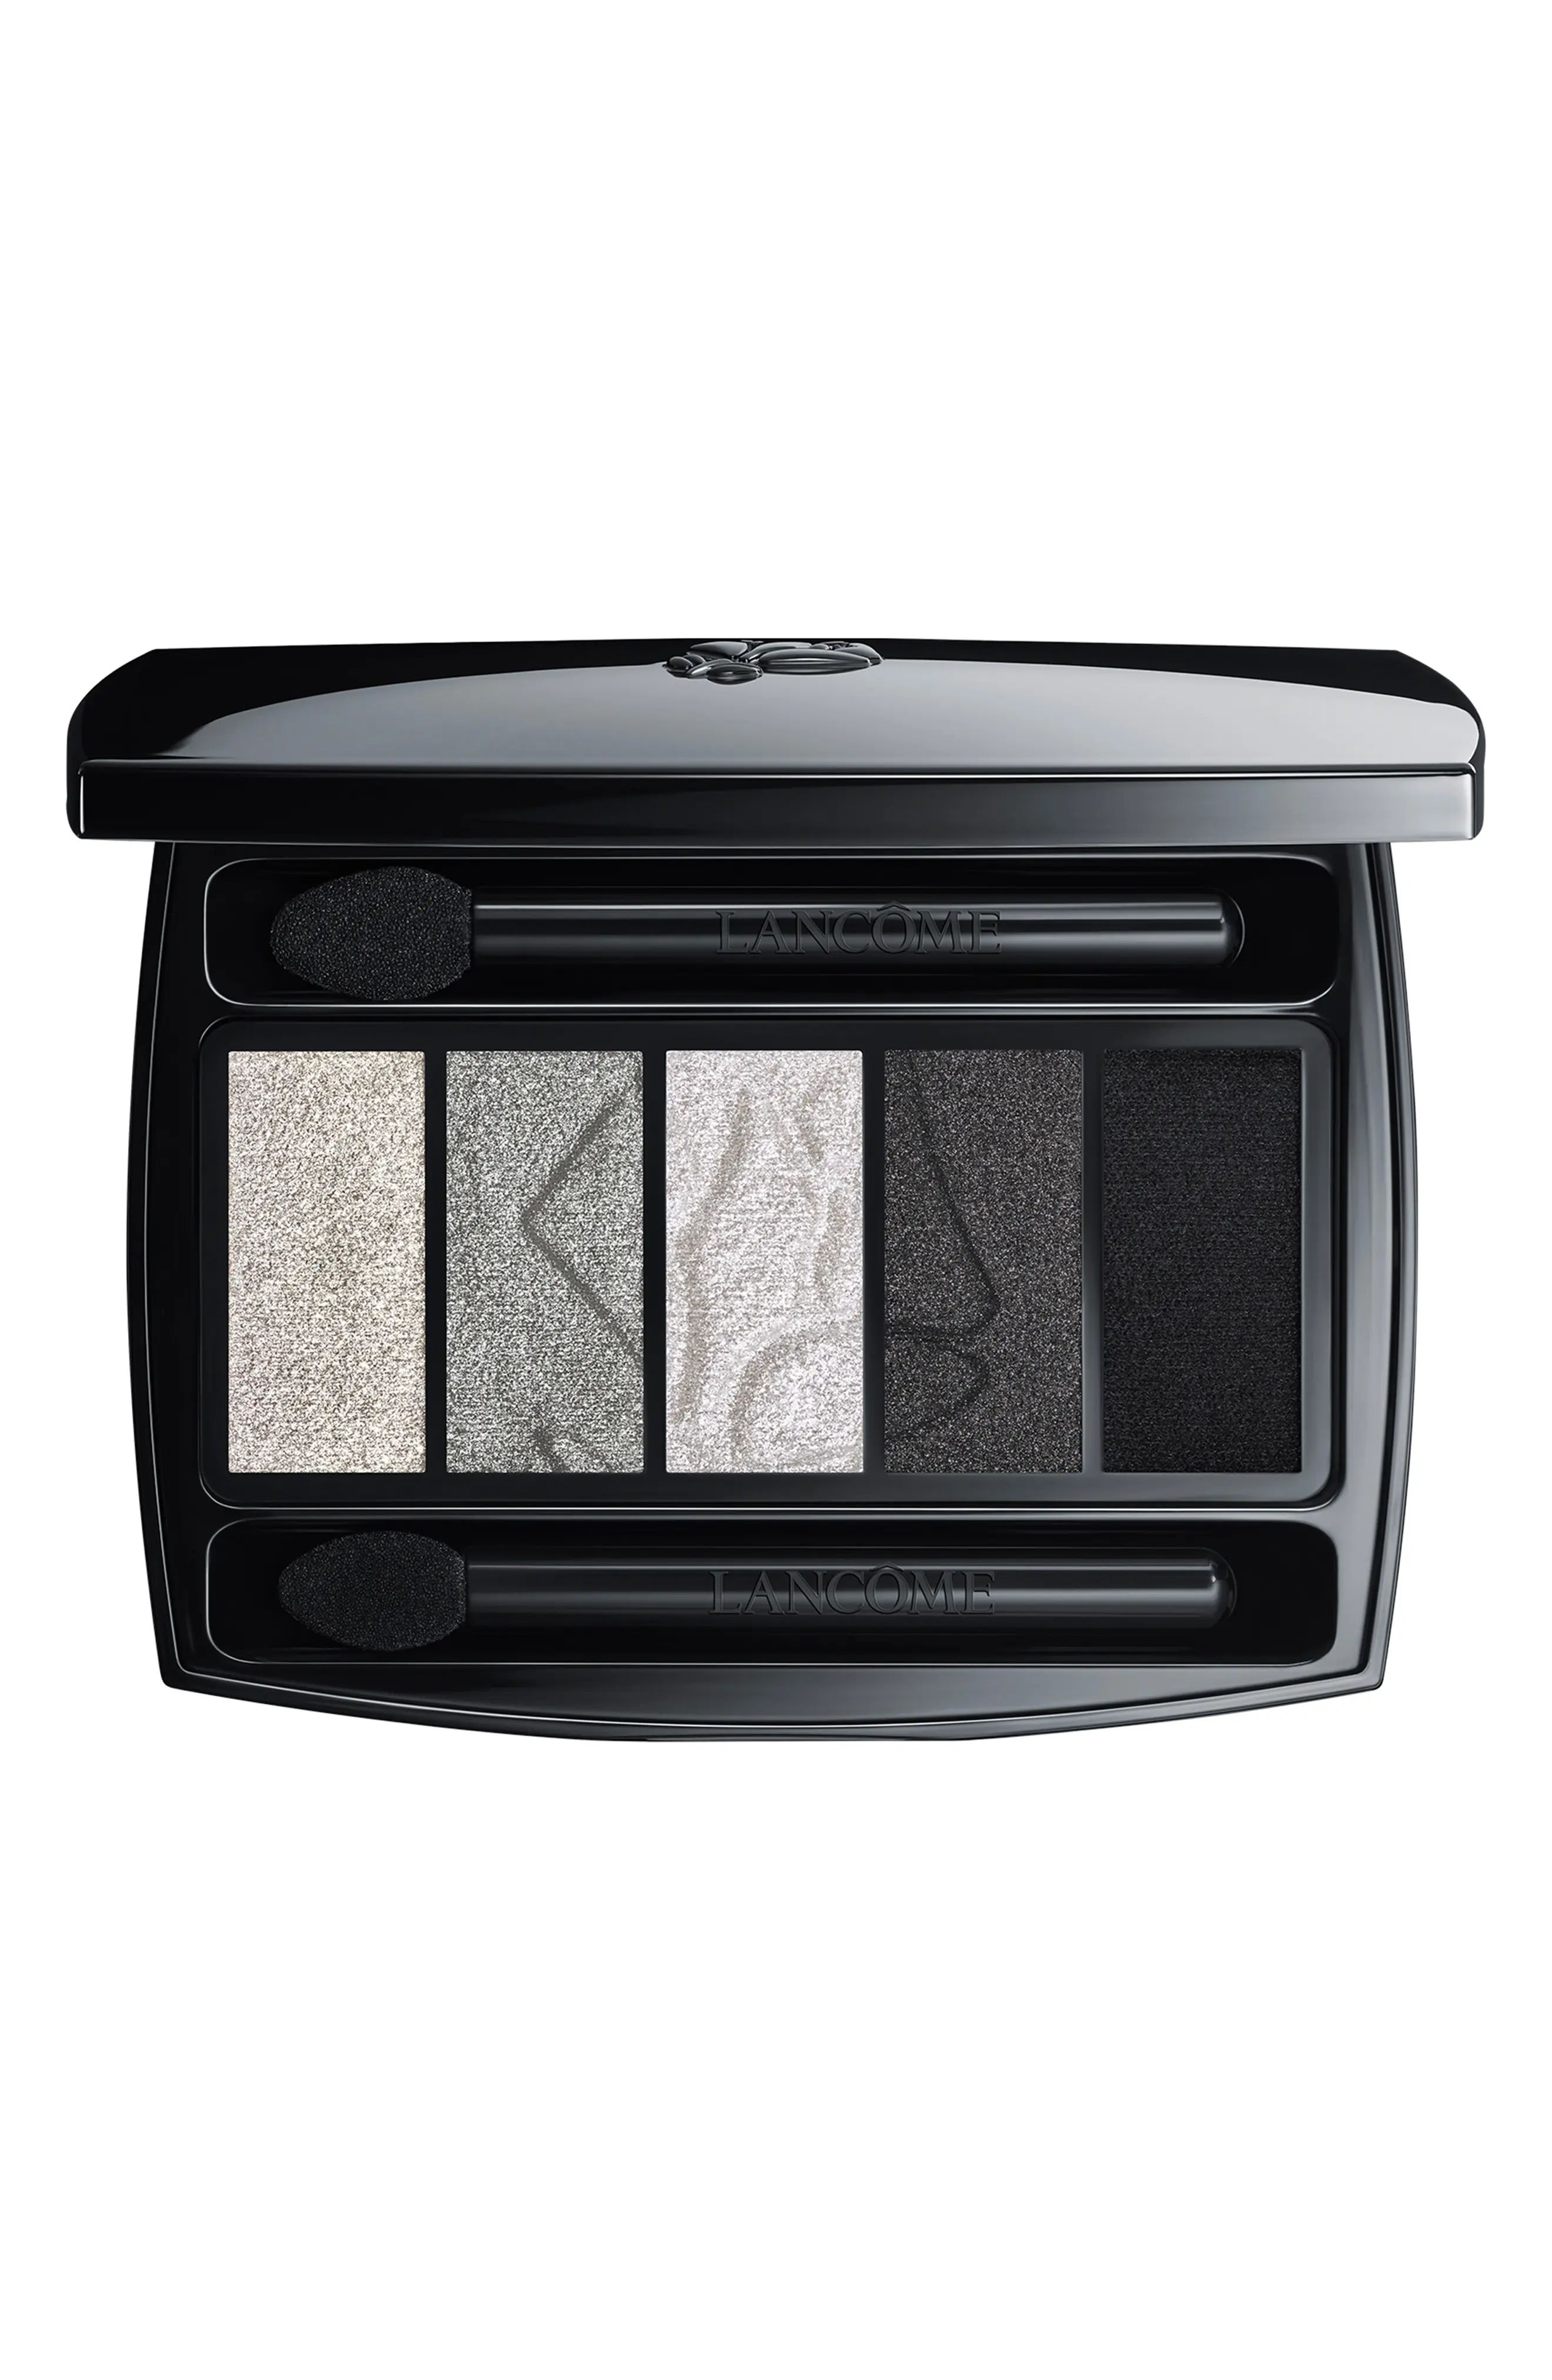 Lancome Color Design Eyeshadow Palette in Smokey Chic at Nordstrom | Nordstrom